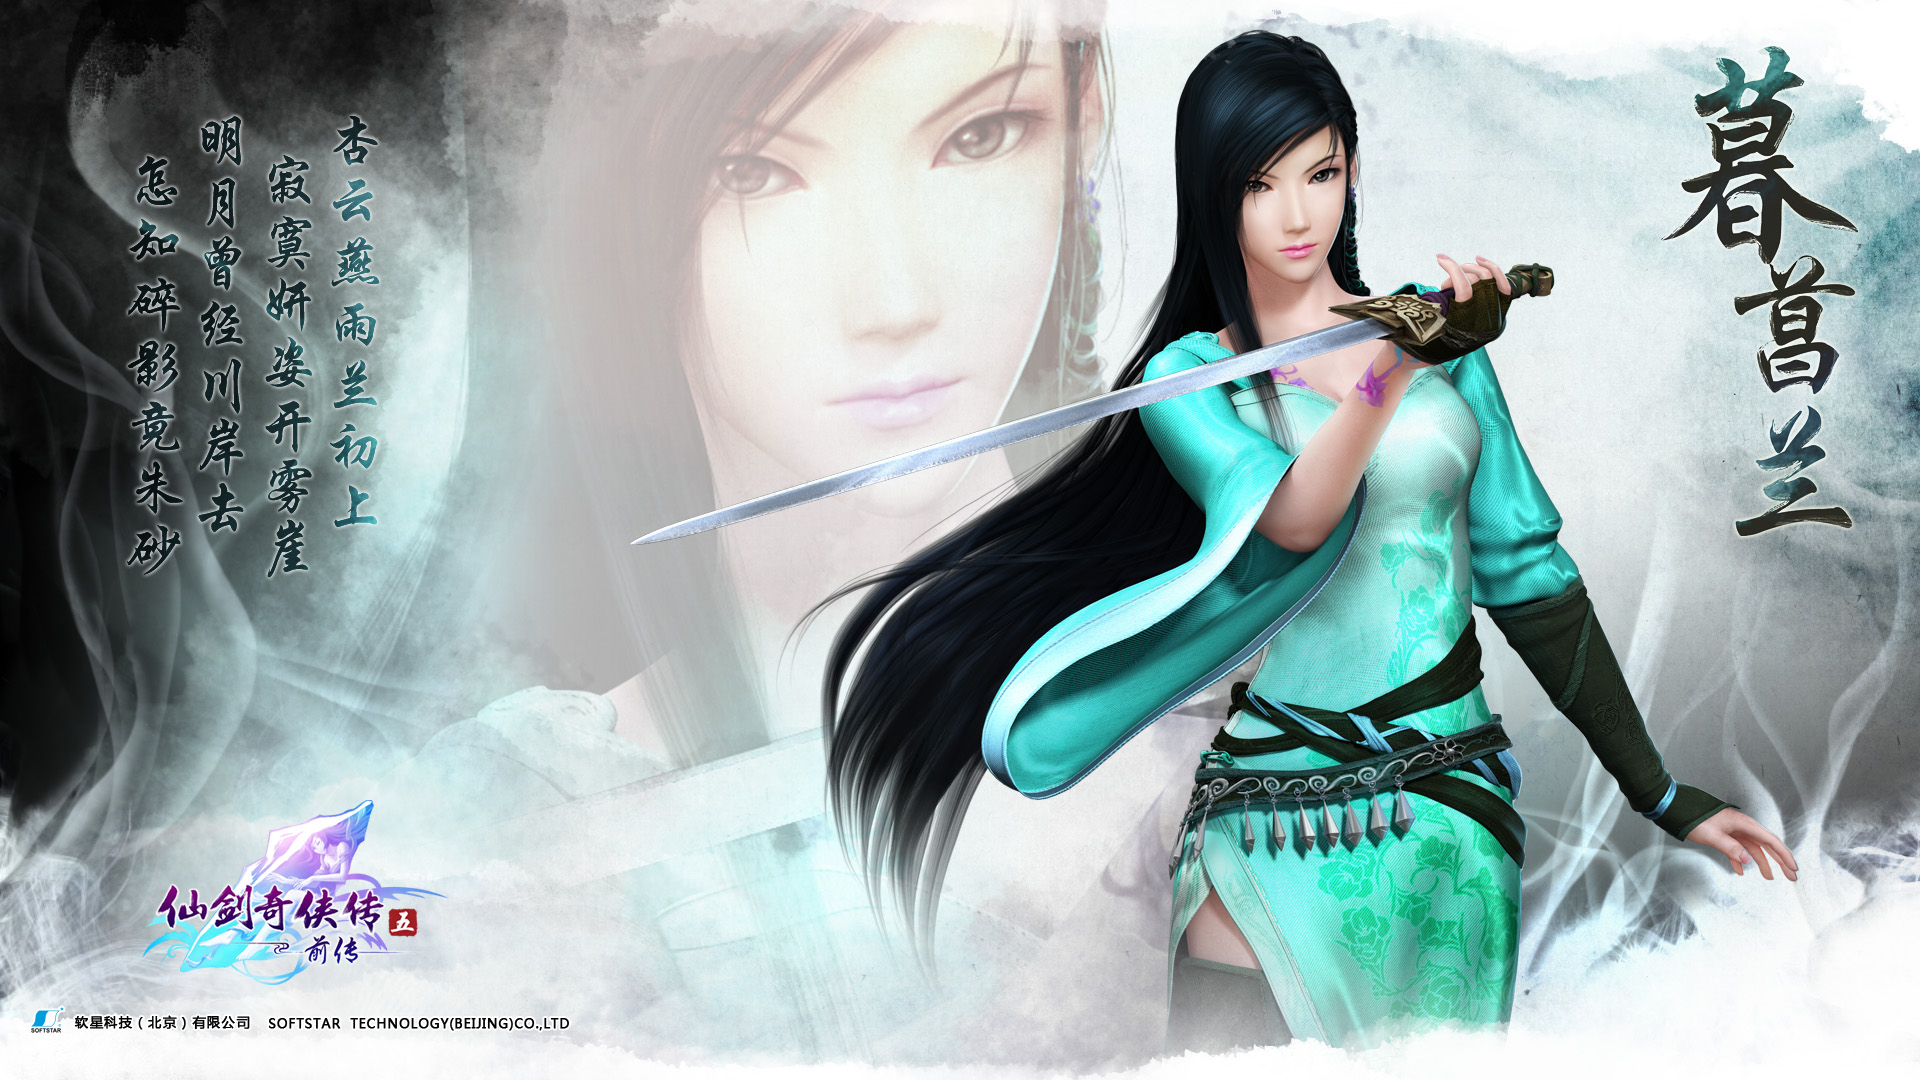 the, Legend, Of, Sword, And, Fairy, Chinese, Paladin, Fantasy, Wuxia,  2 Wallpaper